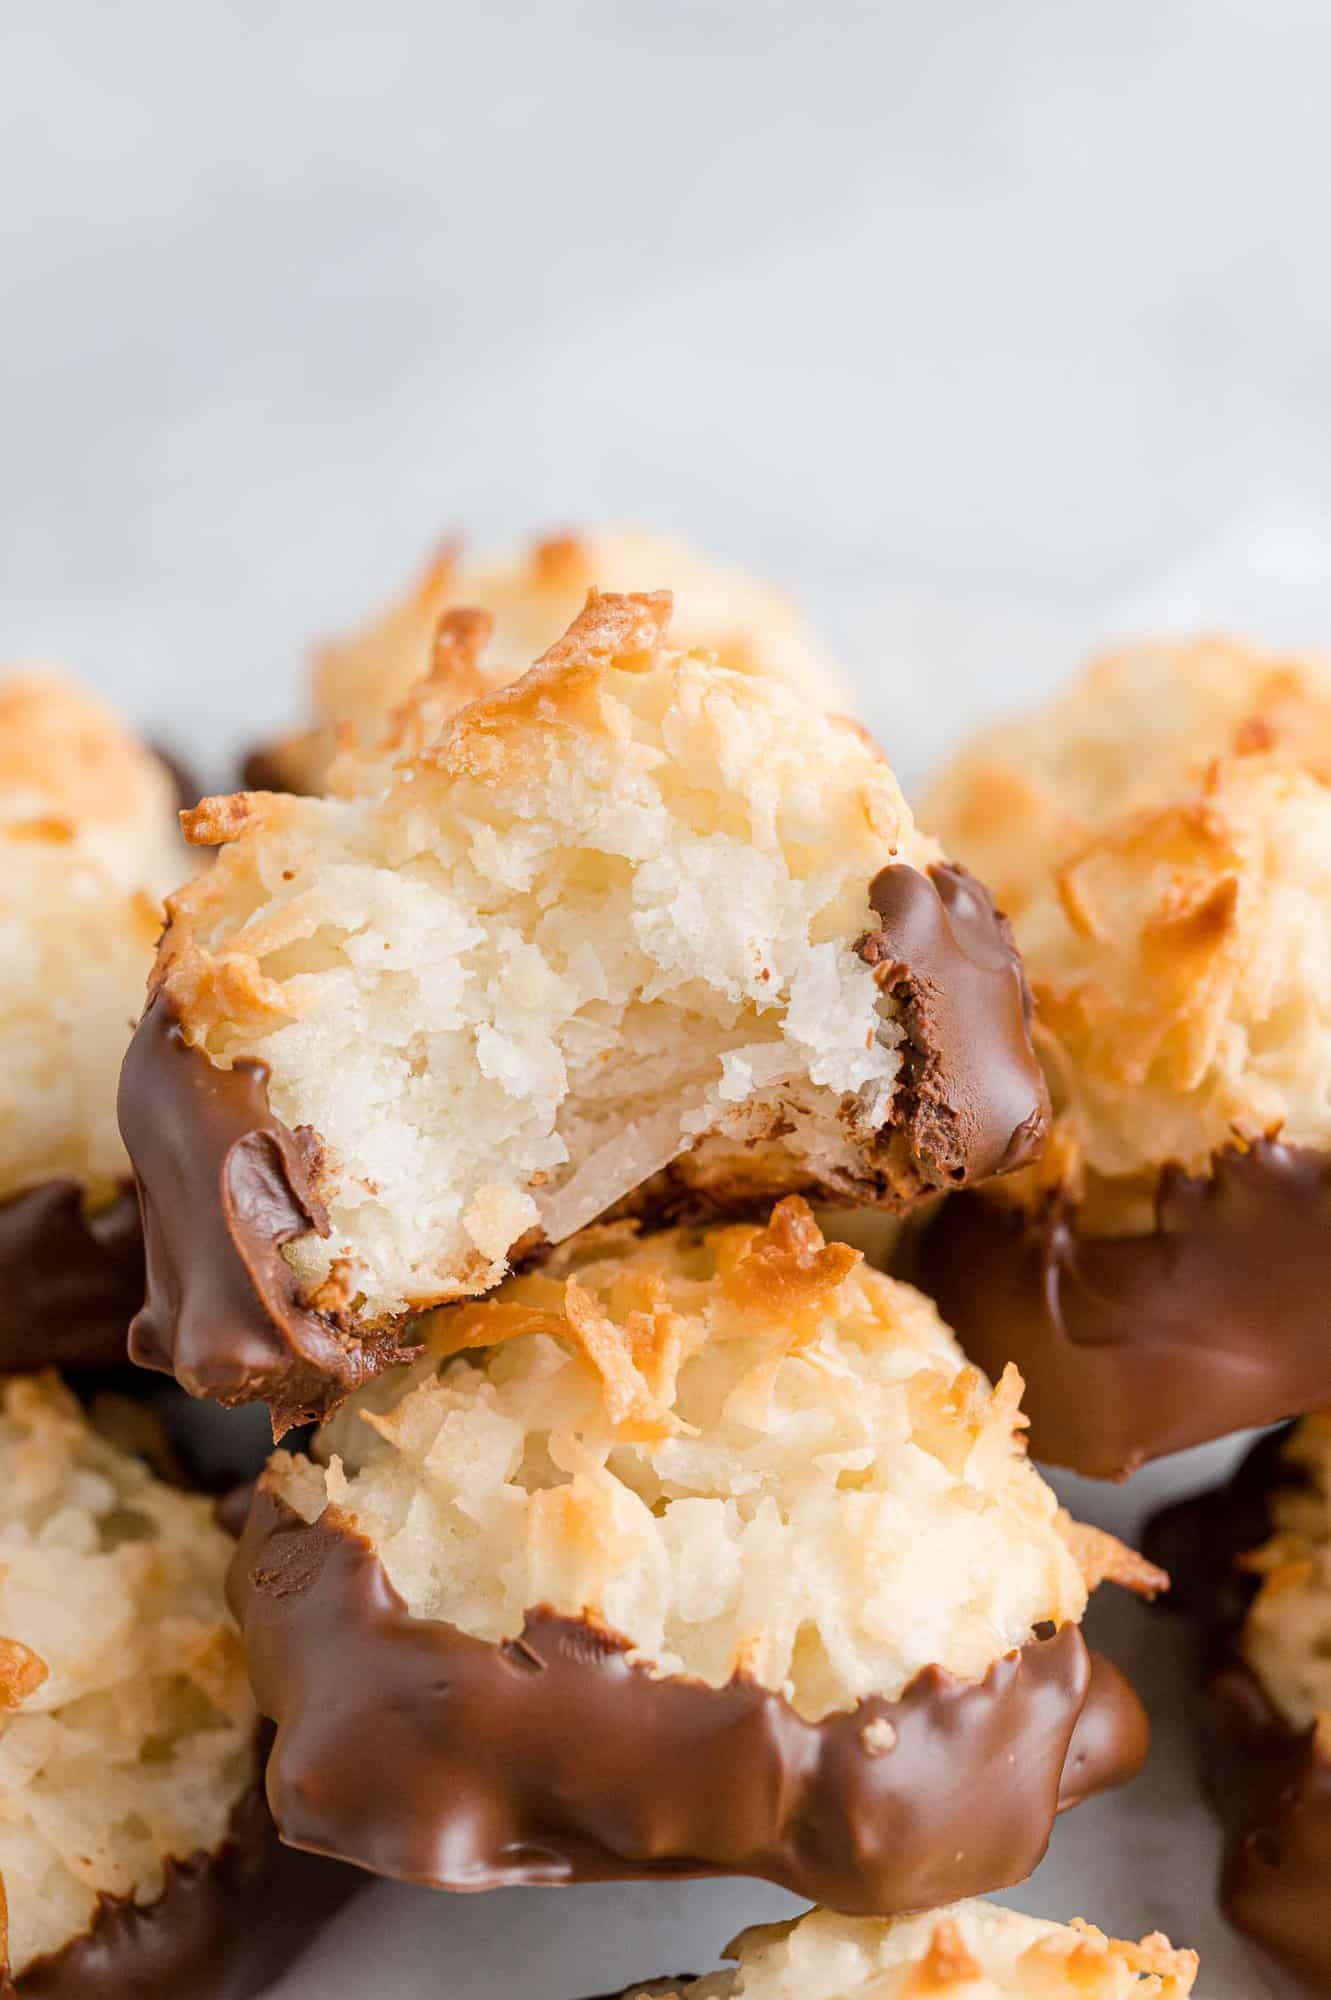 Pile of coconut macaroons, one with bite taken.